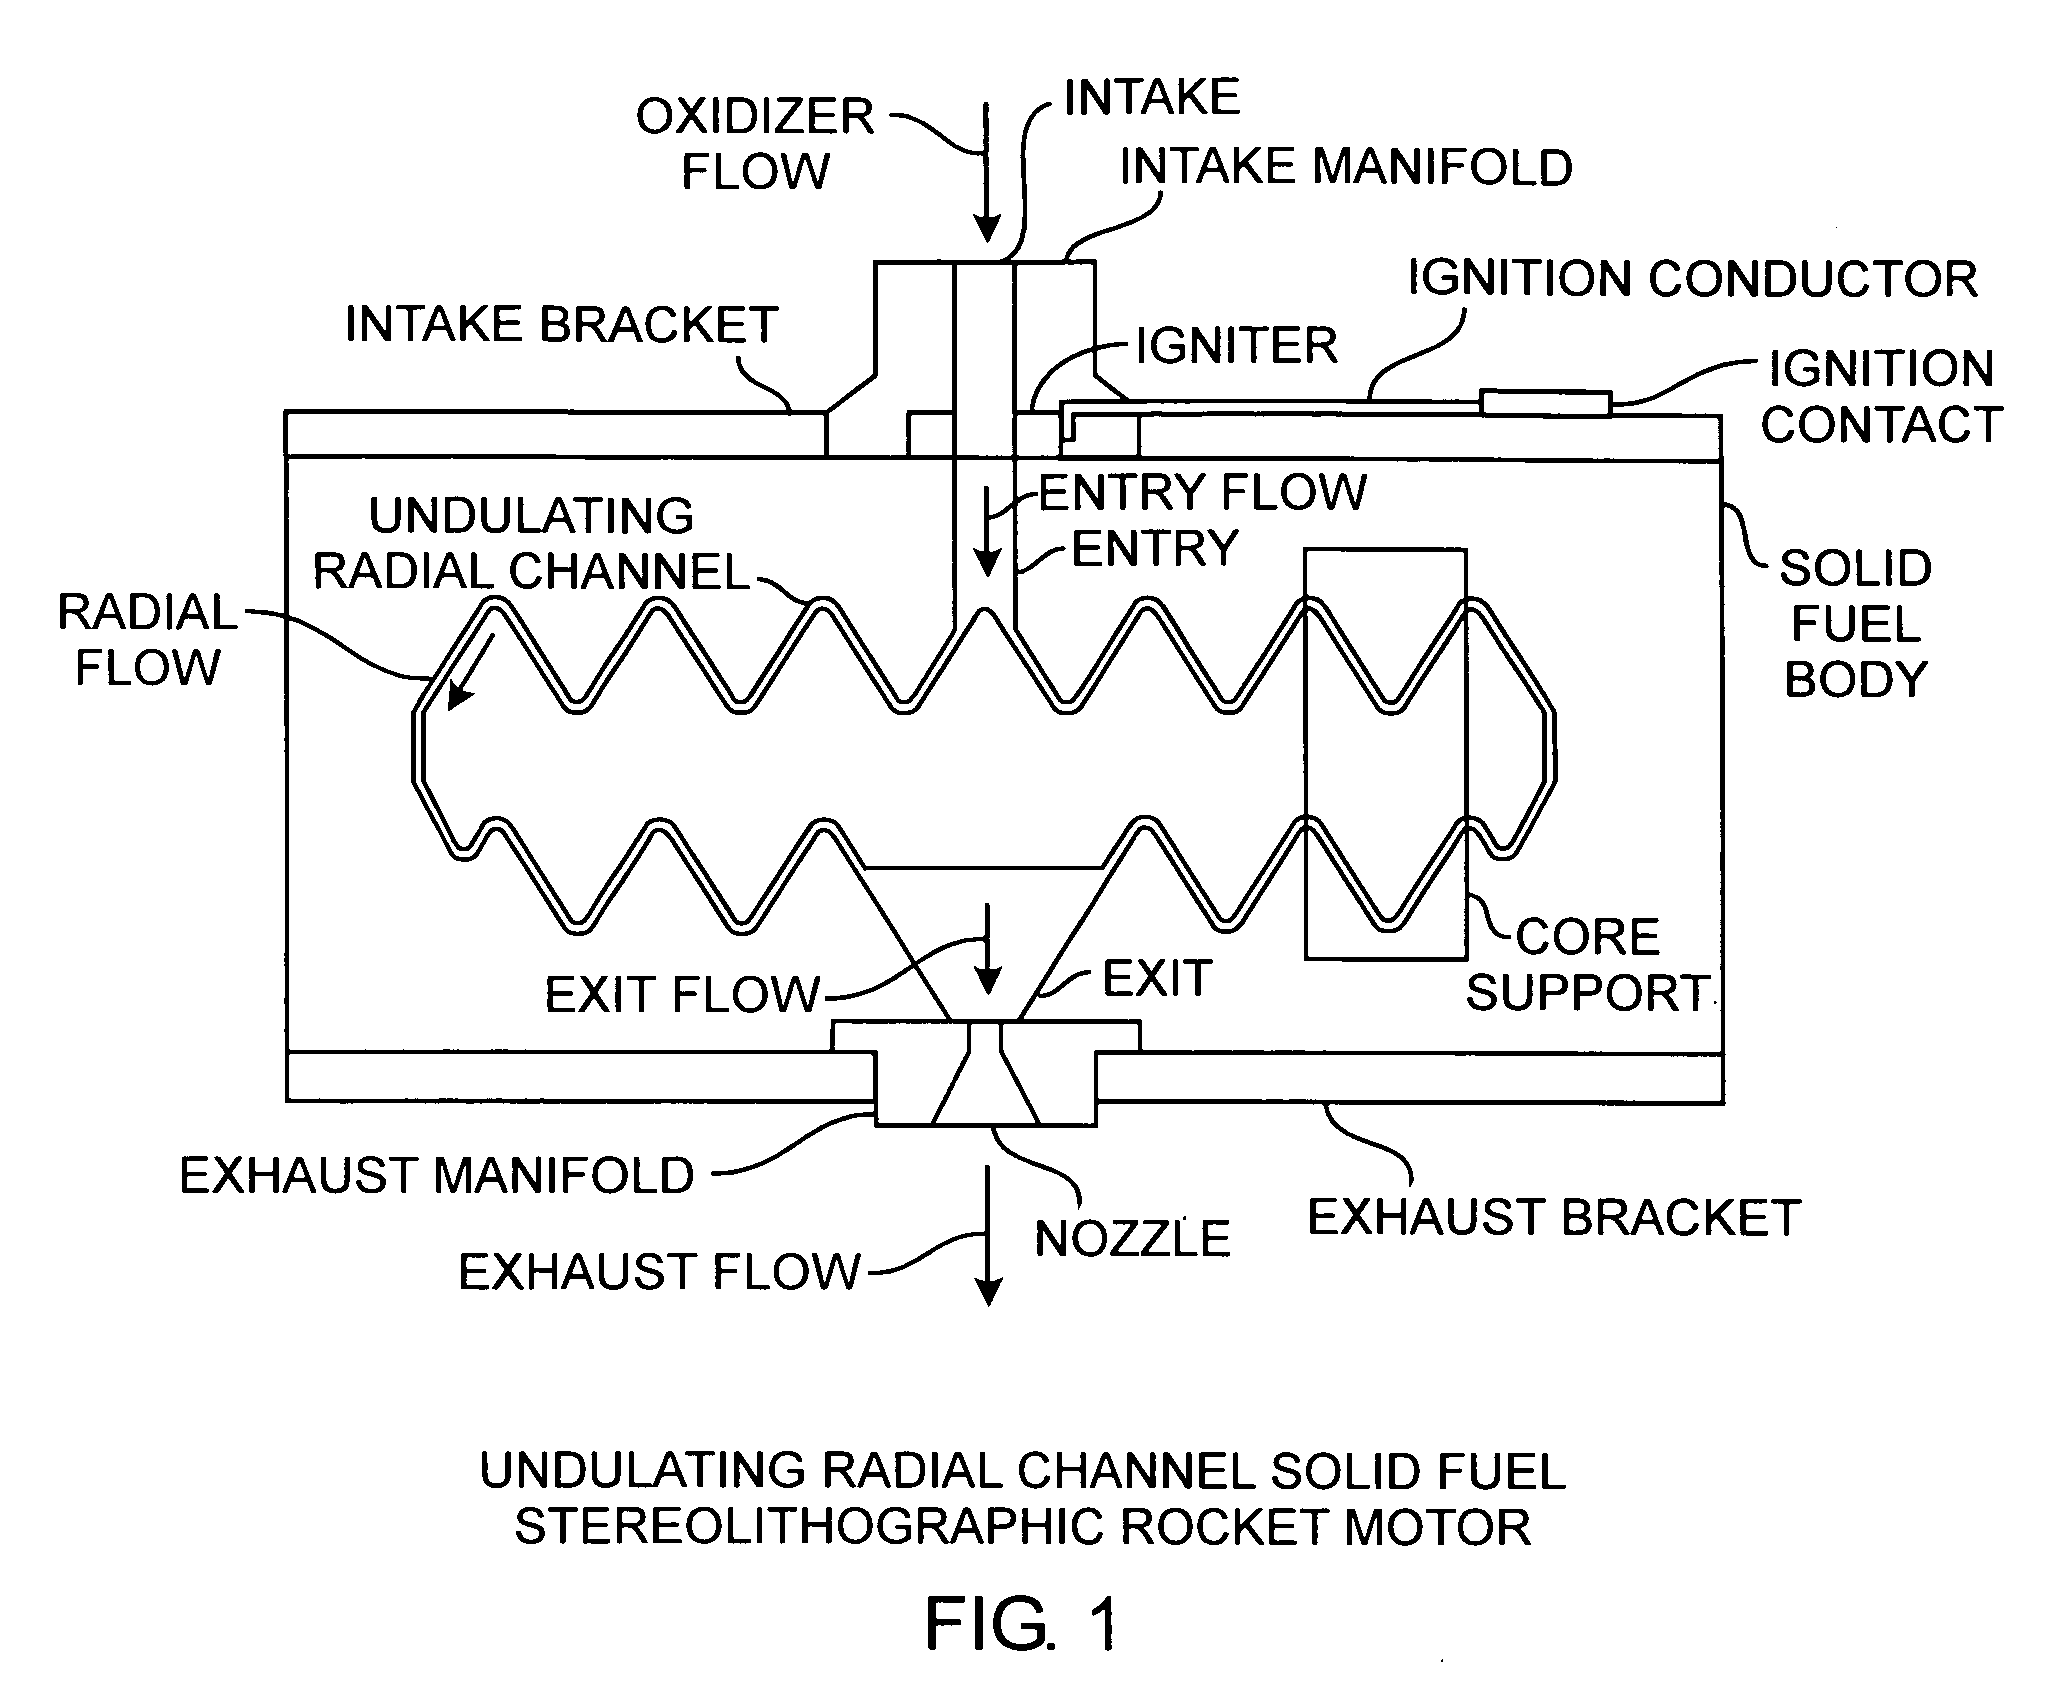 Buried radial flow stereolithographic rocket motor